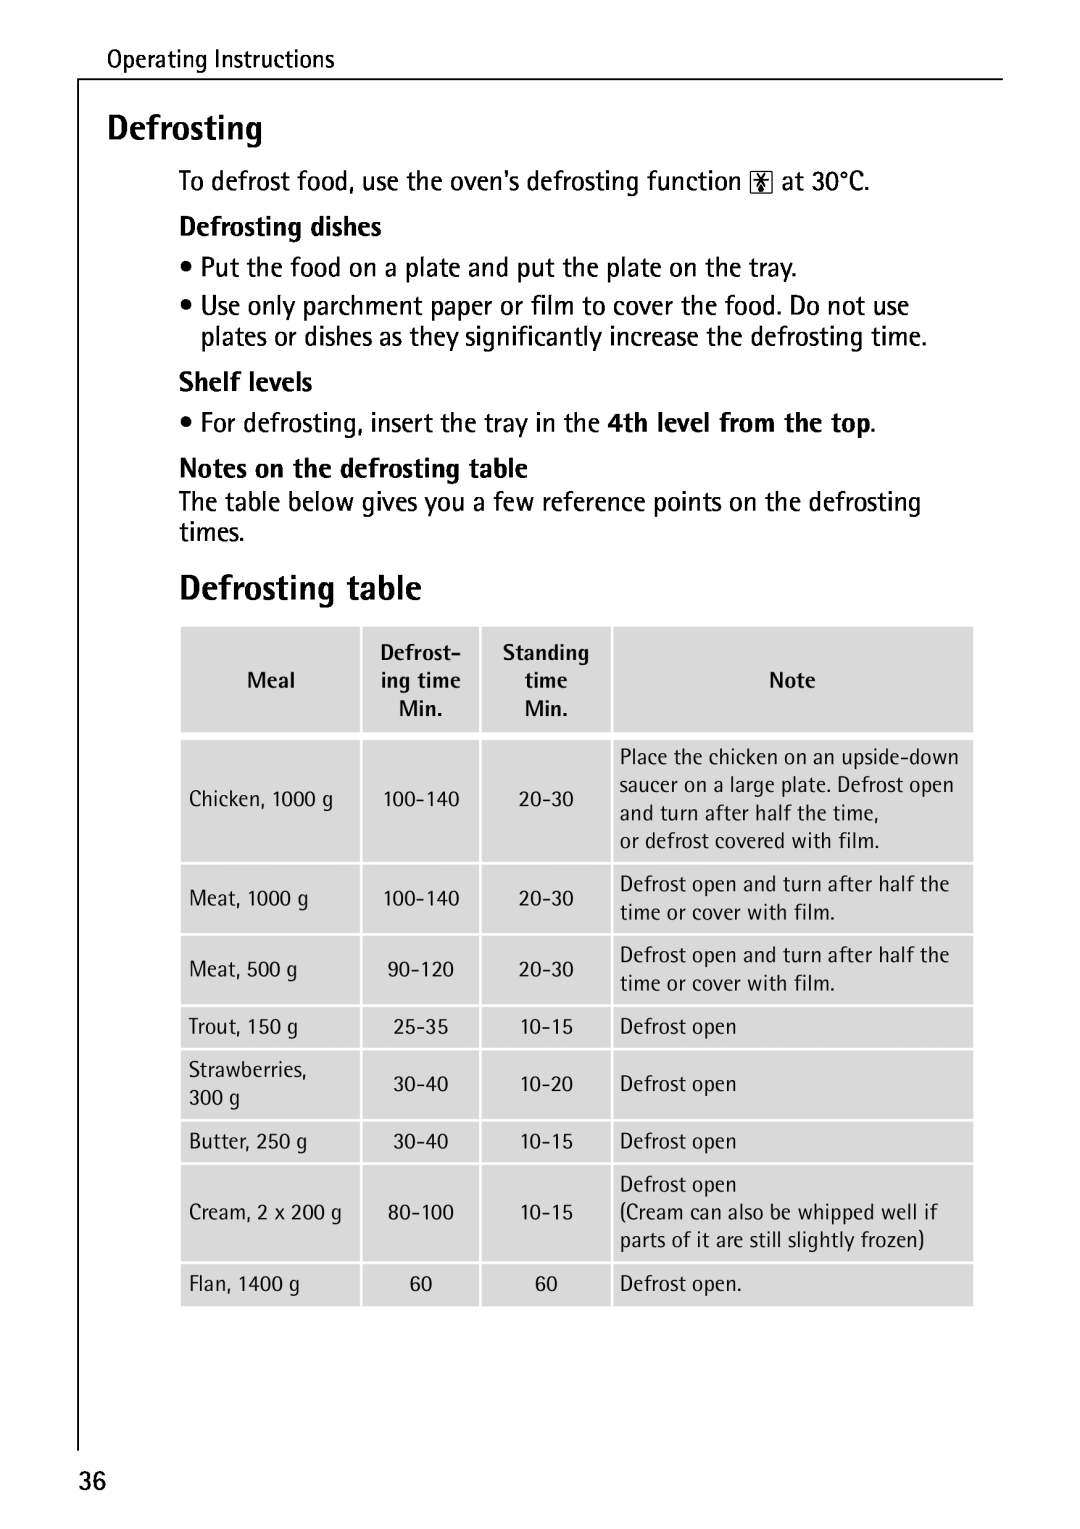 AEG B 4100 operating instructions Defrosting table, Defrosting dishes, Shelf levels, Notes on the defrosting table 